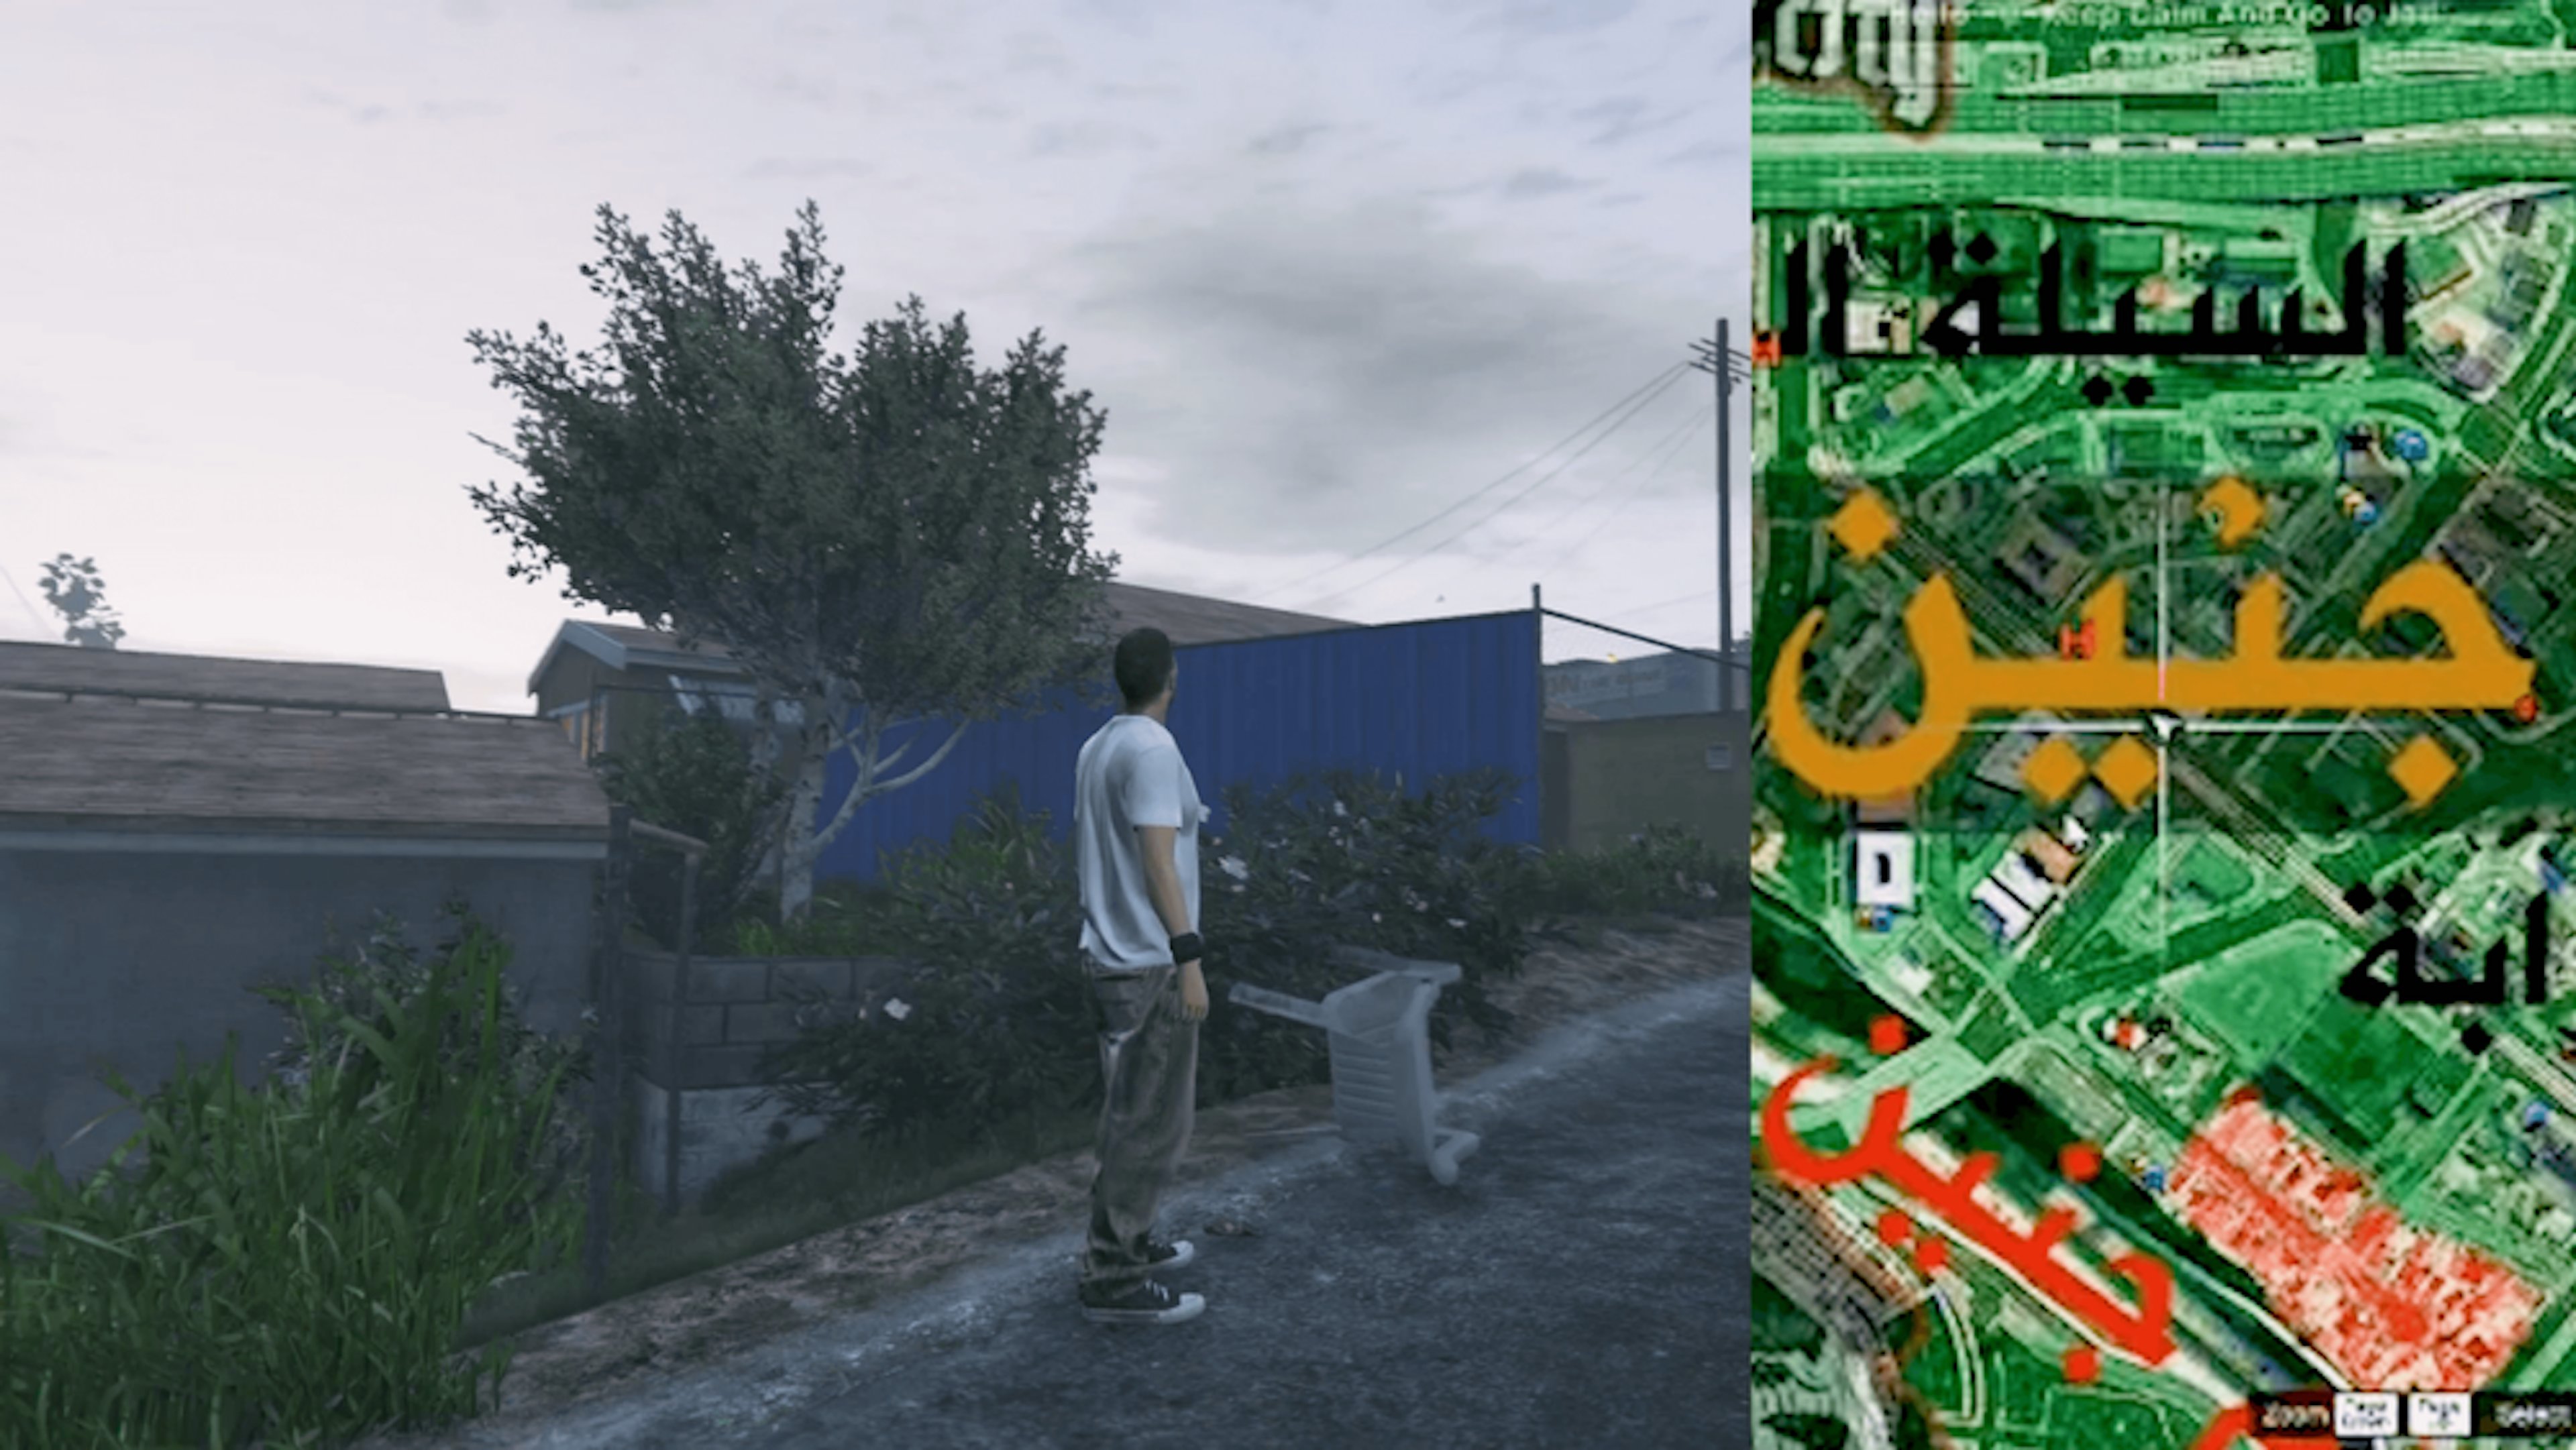 An image split with two elements. On the left is a 3D-rendered image of a street with a figure facing their back towards the viewer. On the right are Arabic letters, on top of green patterns that resemble maps.